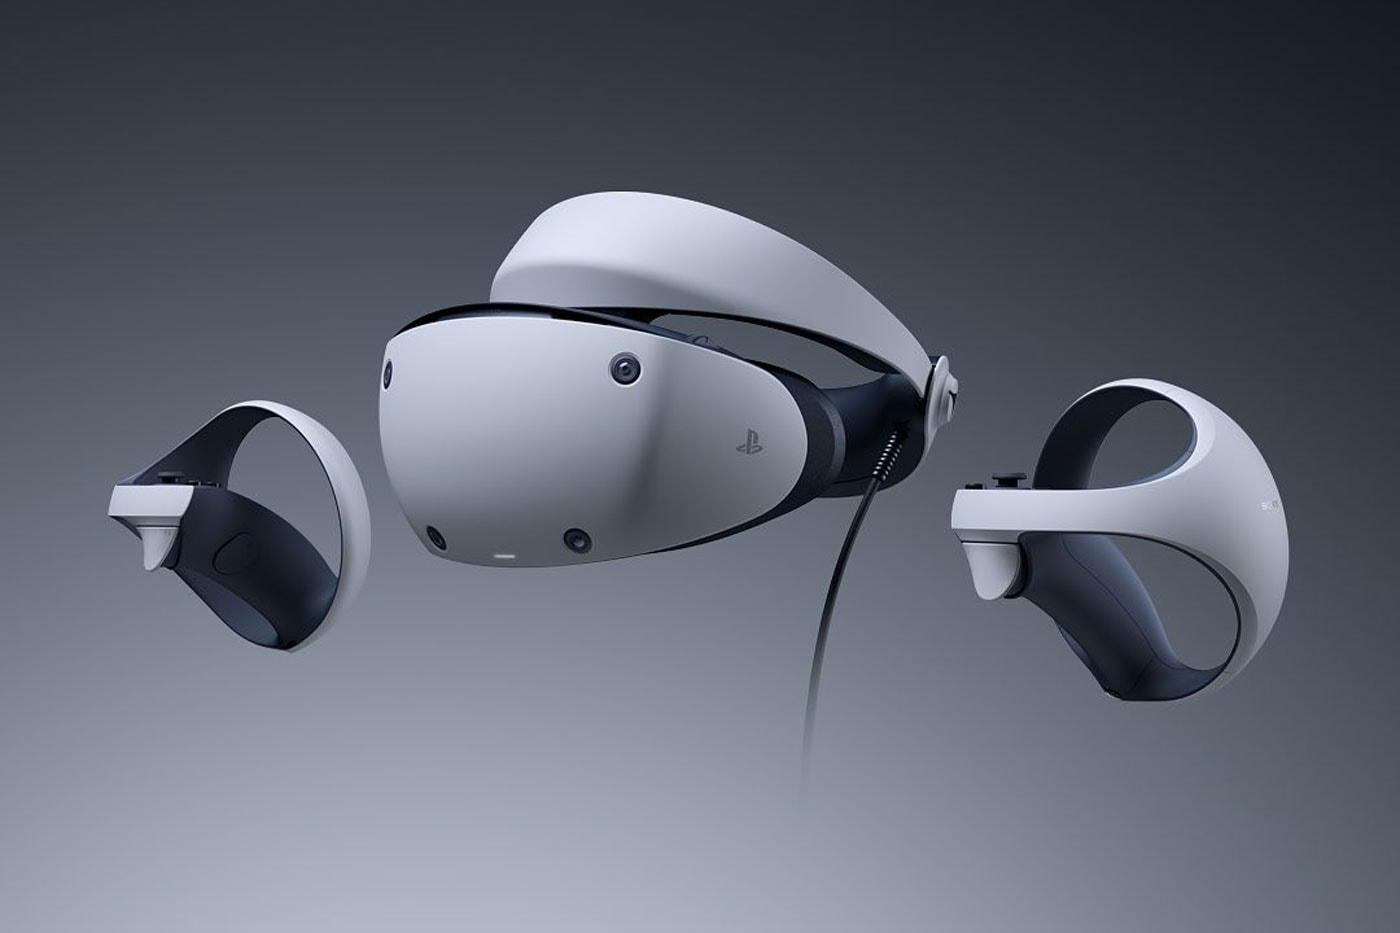 Sony Playstation VR2 Coming early 2023 virtual reality headset 4k resolution 120 hz 110 degree field of view foveated rendering usb c broadcast